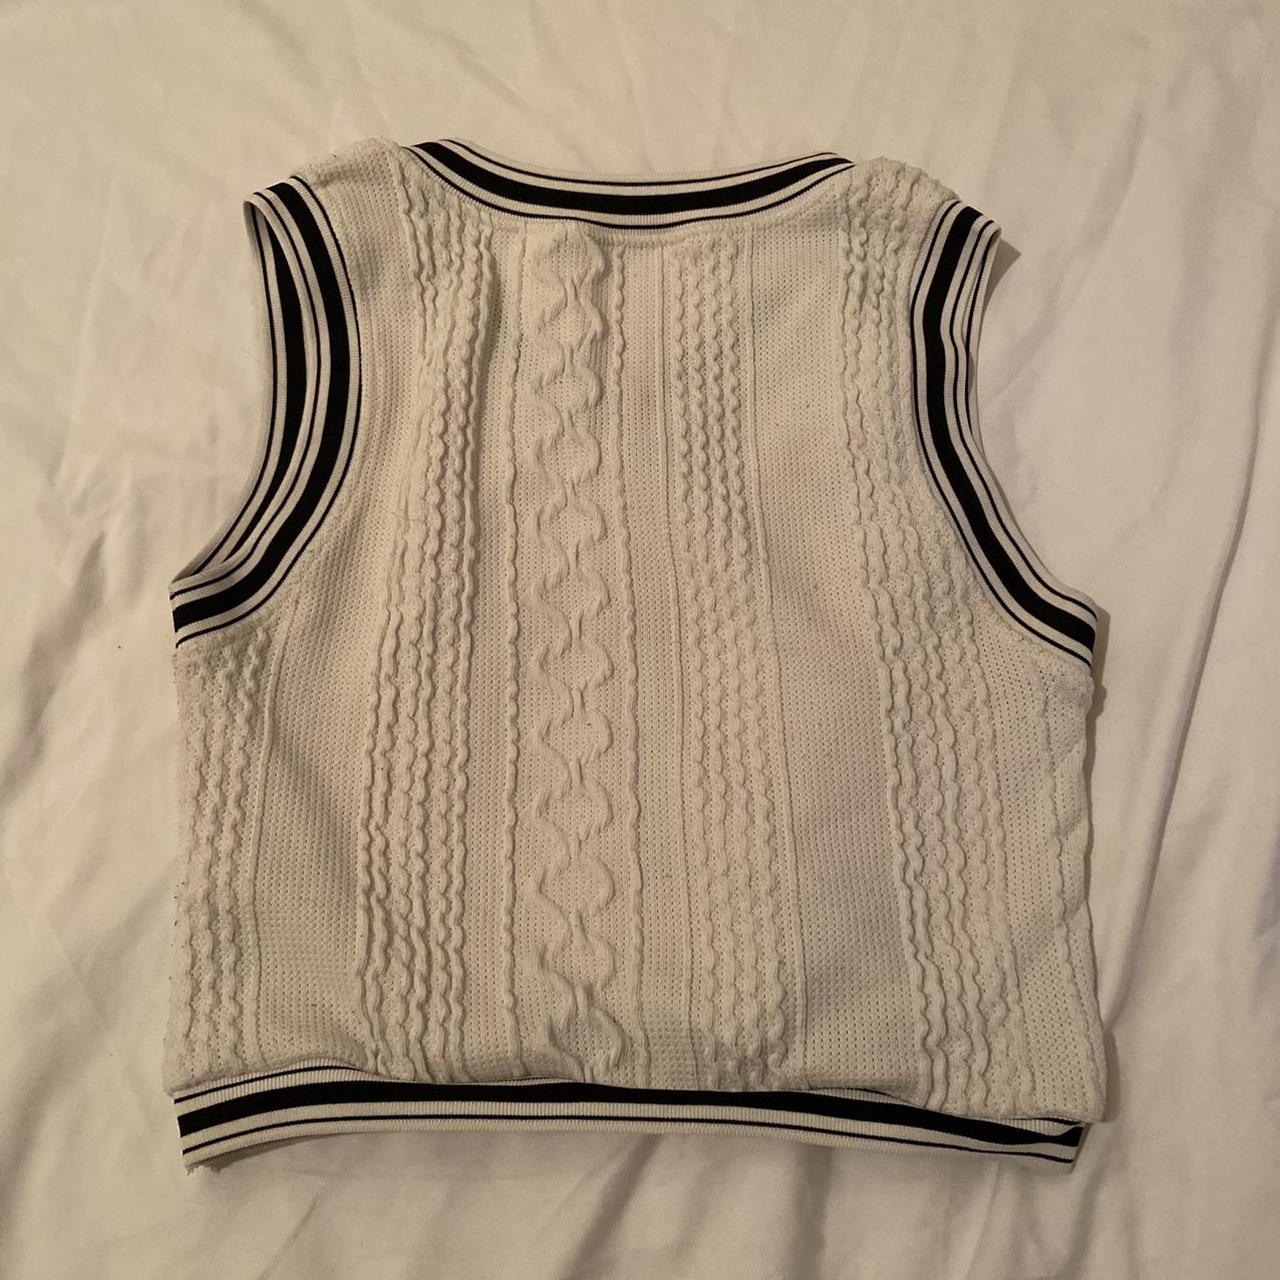 Product Image 3 - Cropped Sweater Vest 🤍


#sweatervest #croppedsweater